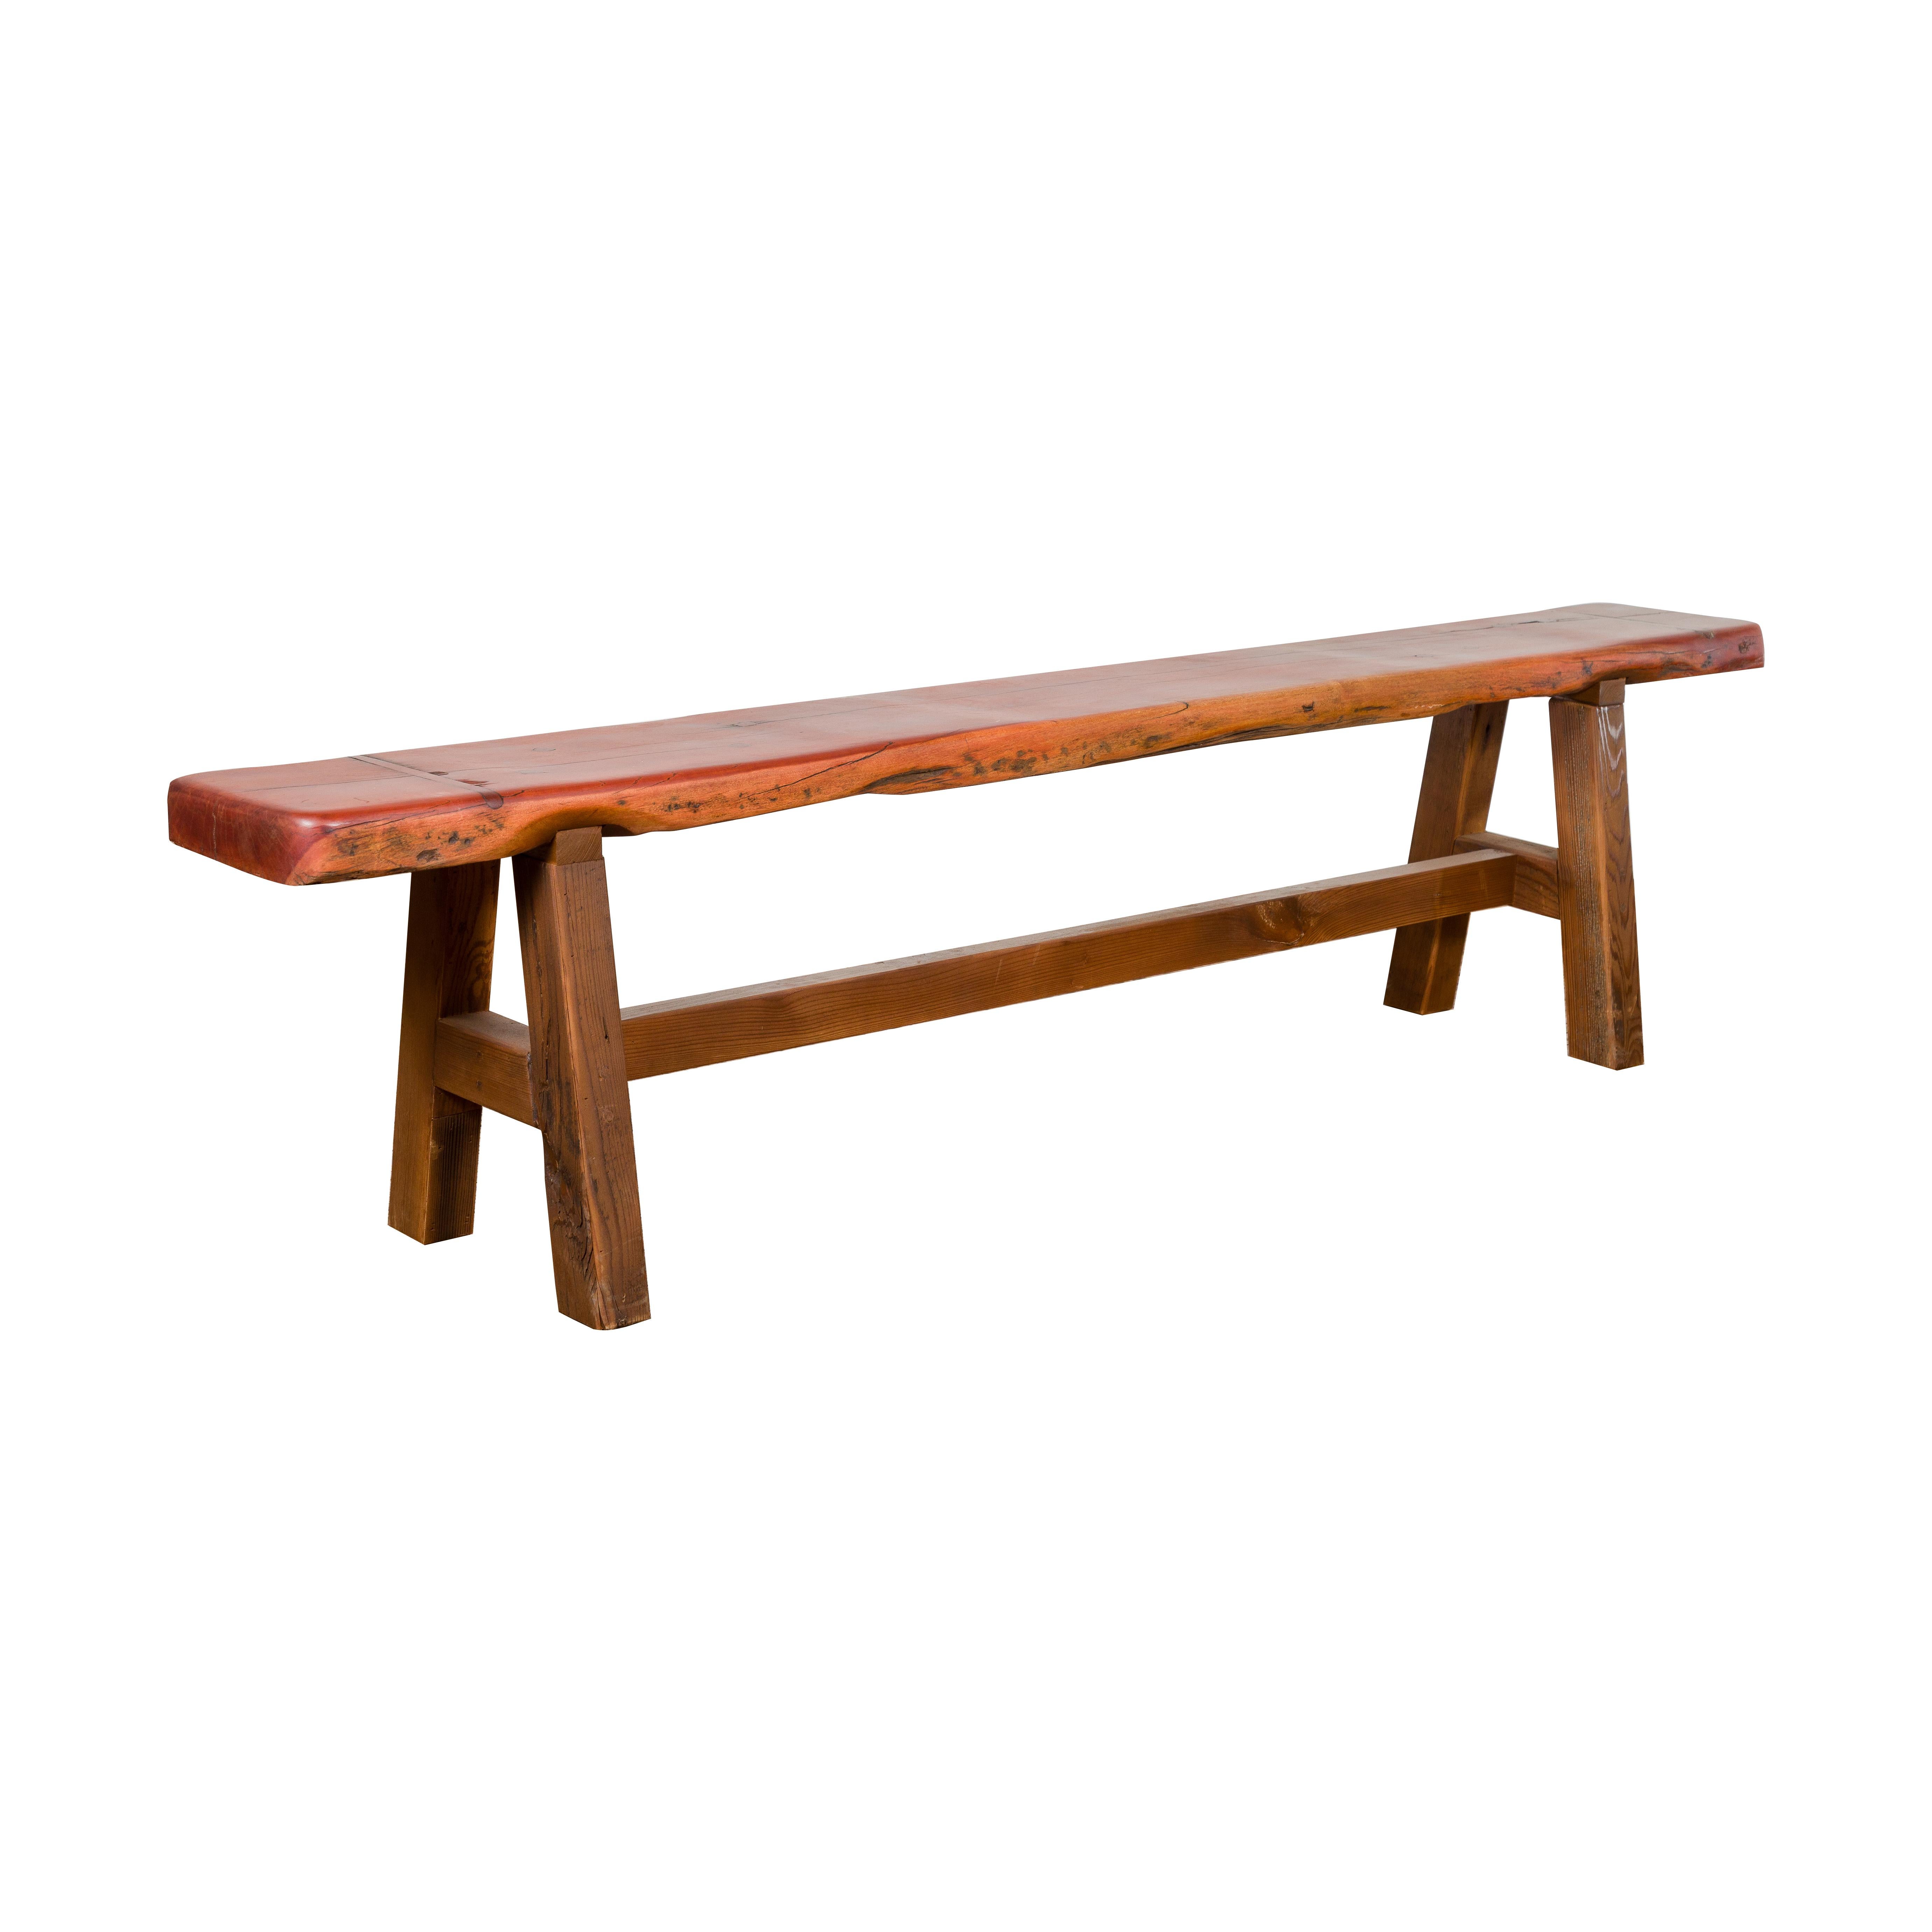 Mingei Style Rustic A-Frame Wooden Bench Made of Railroad Ties with Stretcher For Sale 10